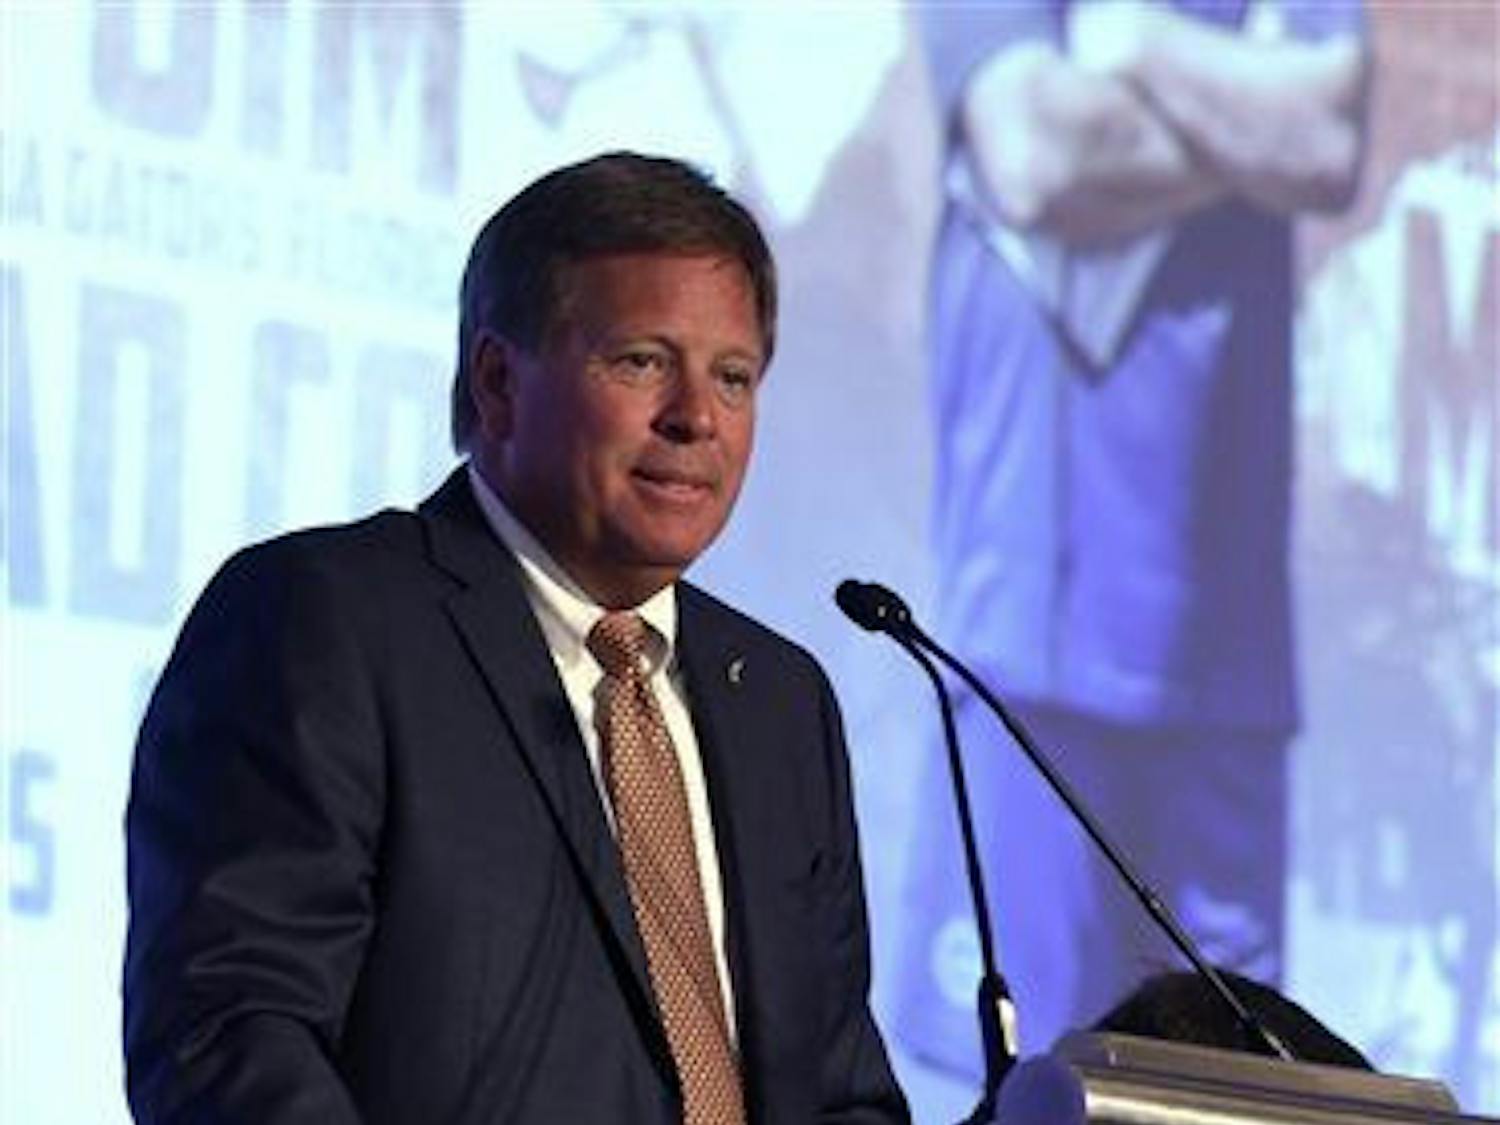 Florida coach Jim McElwain speaks to the media during the NCAA college football Southeastern Conference Media Days, Monday, July 13, 2015, in Hoover, Ala. (AP Photo/Butch Dill)